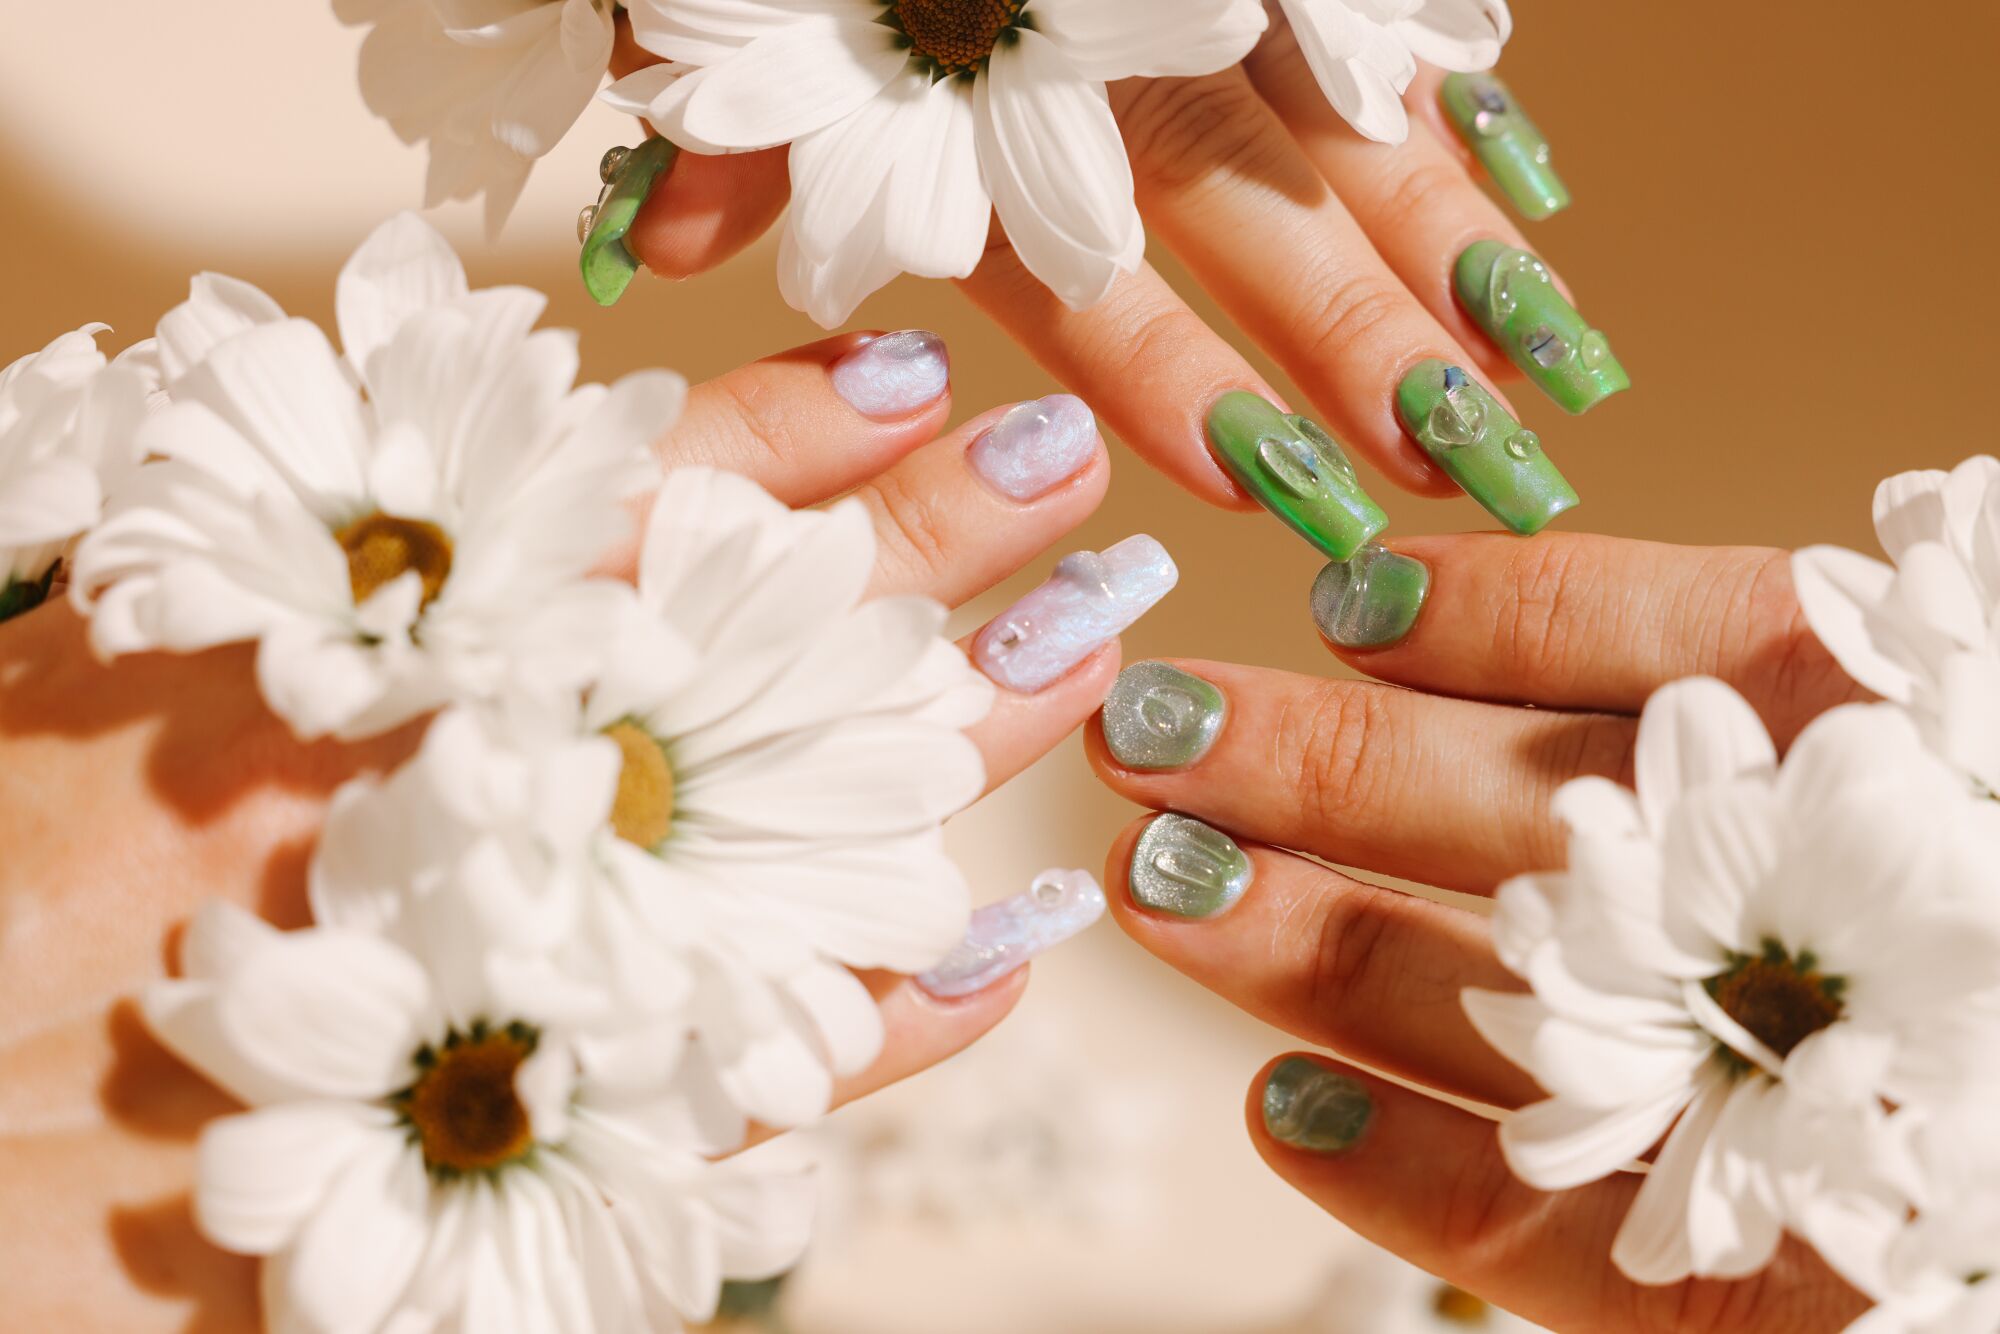 Hands with painted nails reaching into the frame, holding white flowers.